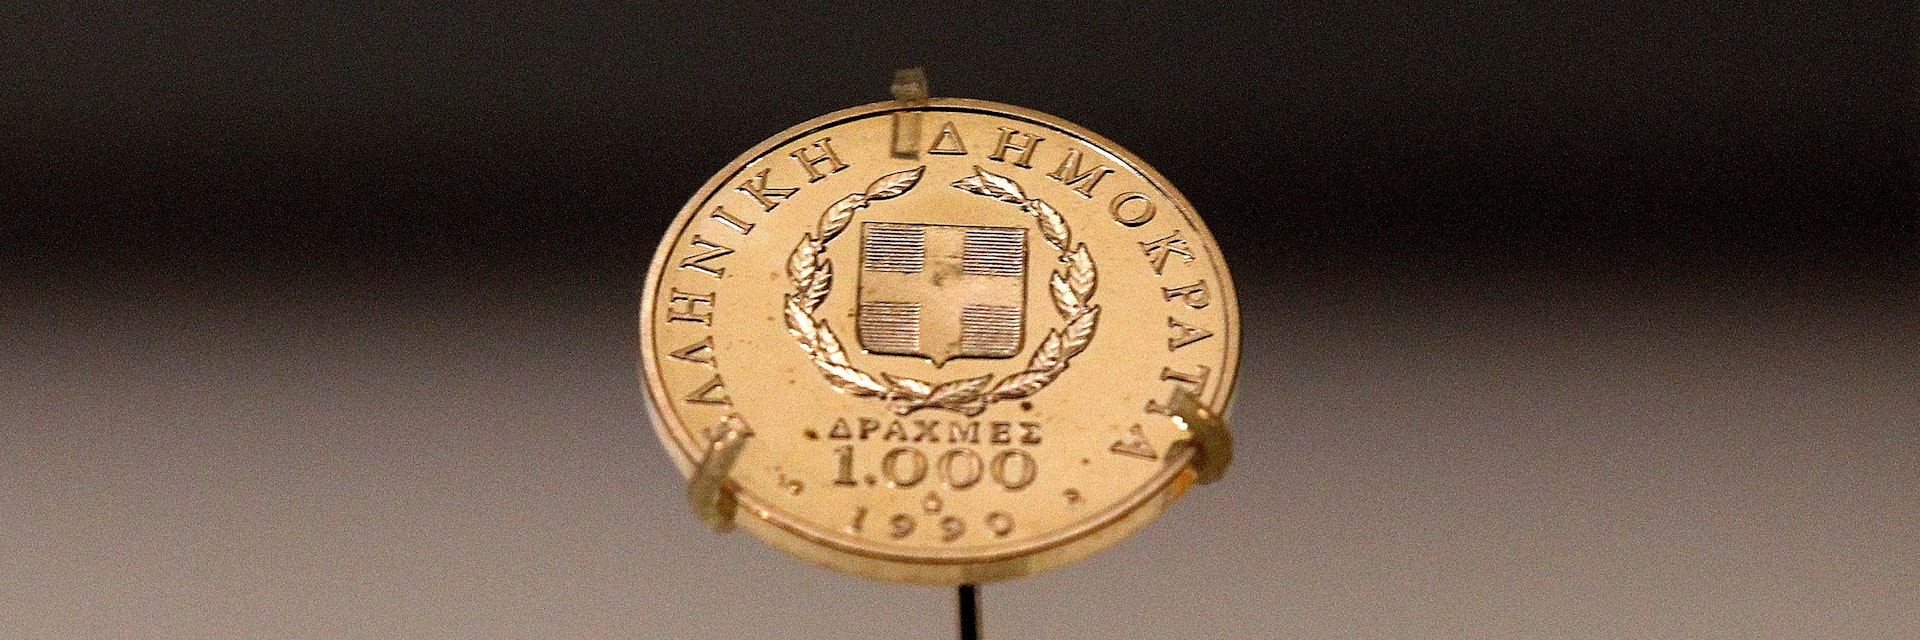 A Greek 1,000 drachma coin dating from 1999, sits on display in a secure cabinet at the Bank of Greece museum in Athens, Greece, on Tuesday, Feb. 14, 2012. European officials ratcheted up the pressure on the Greek government to deliver budget cuts in exchange for a second bailout as they insisted that default is not an option. Photographer: Simon Dawson/Bloomberg via Getty Images
138990488
AUSTERITY, BAILOUT, CURRECY; CURRENCIES, CUTS, ECONOMY, EMEA, EUROPE, FINANCE, FINANCIAL